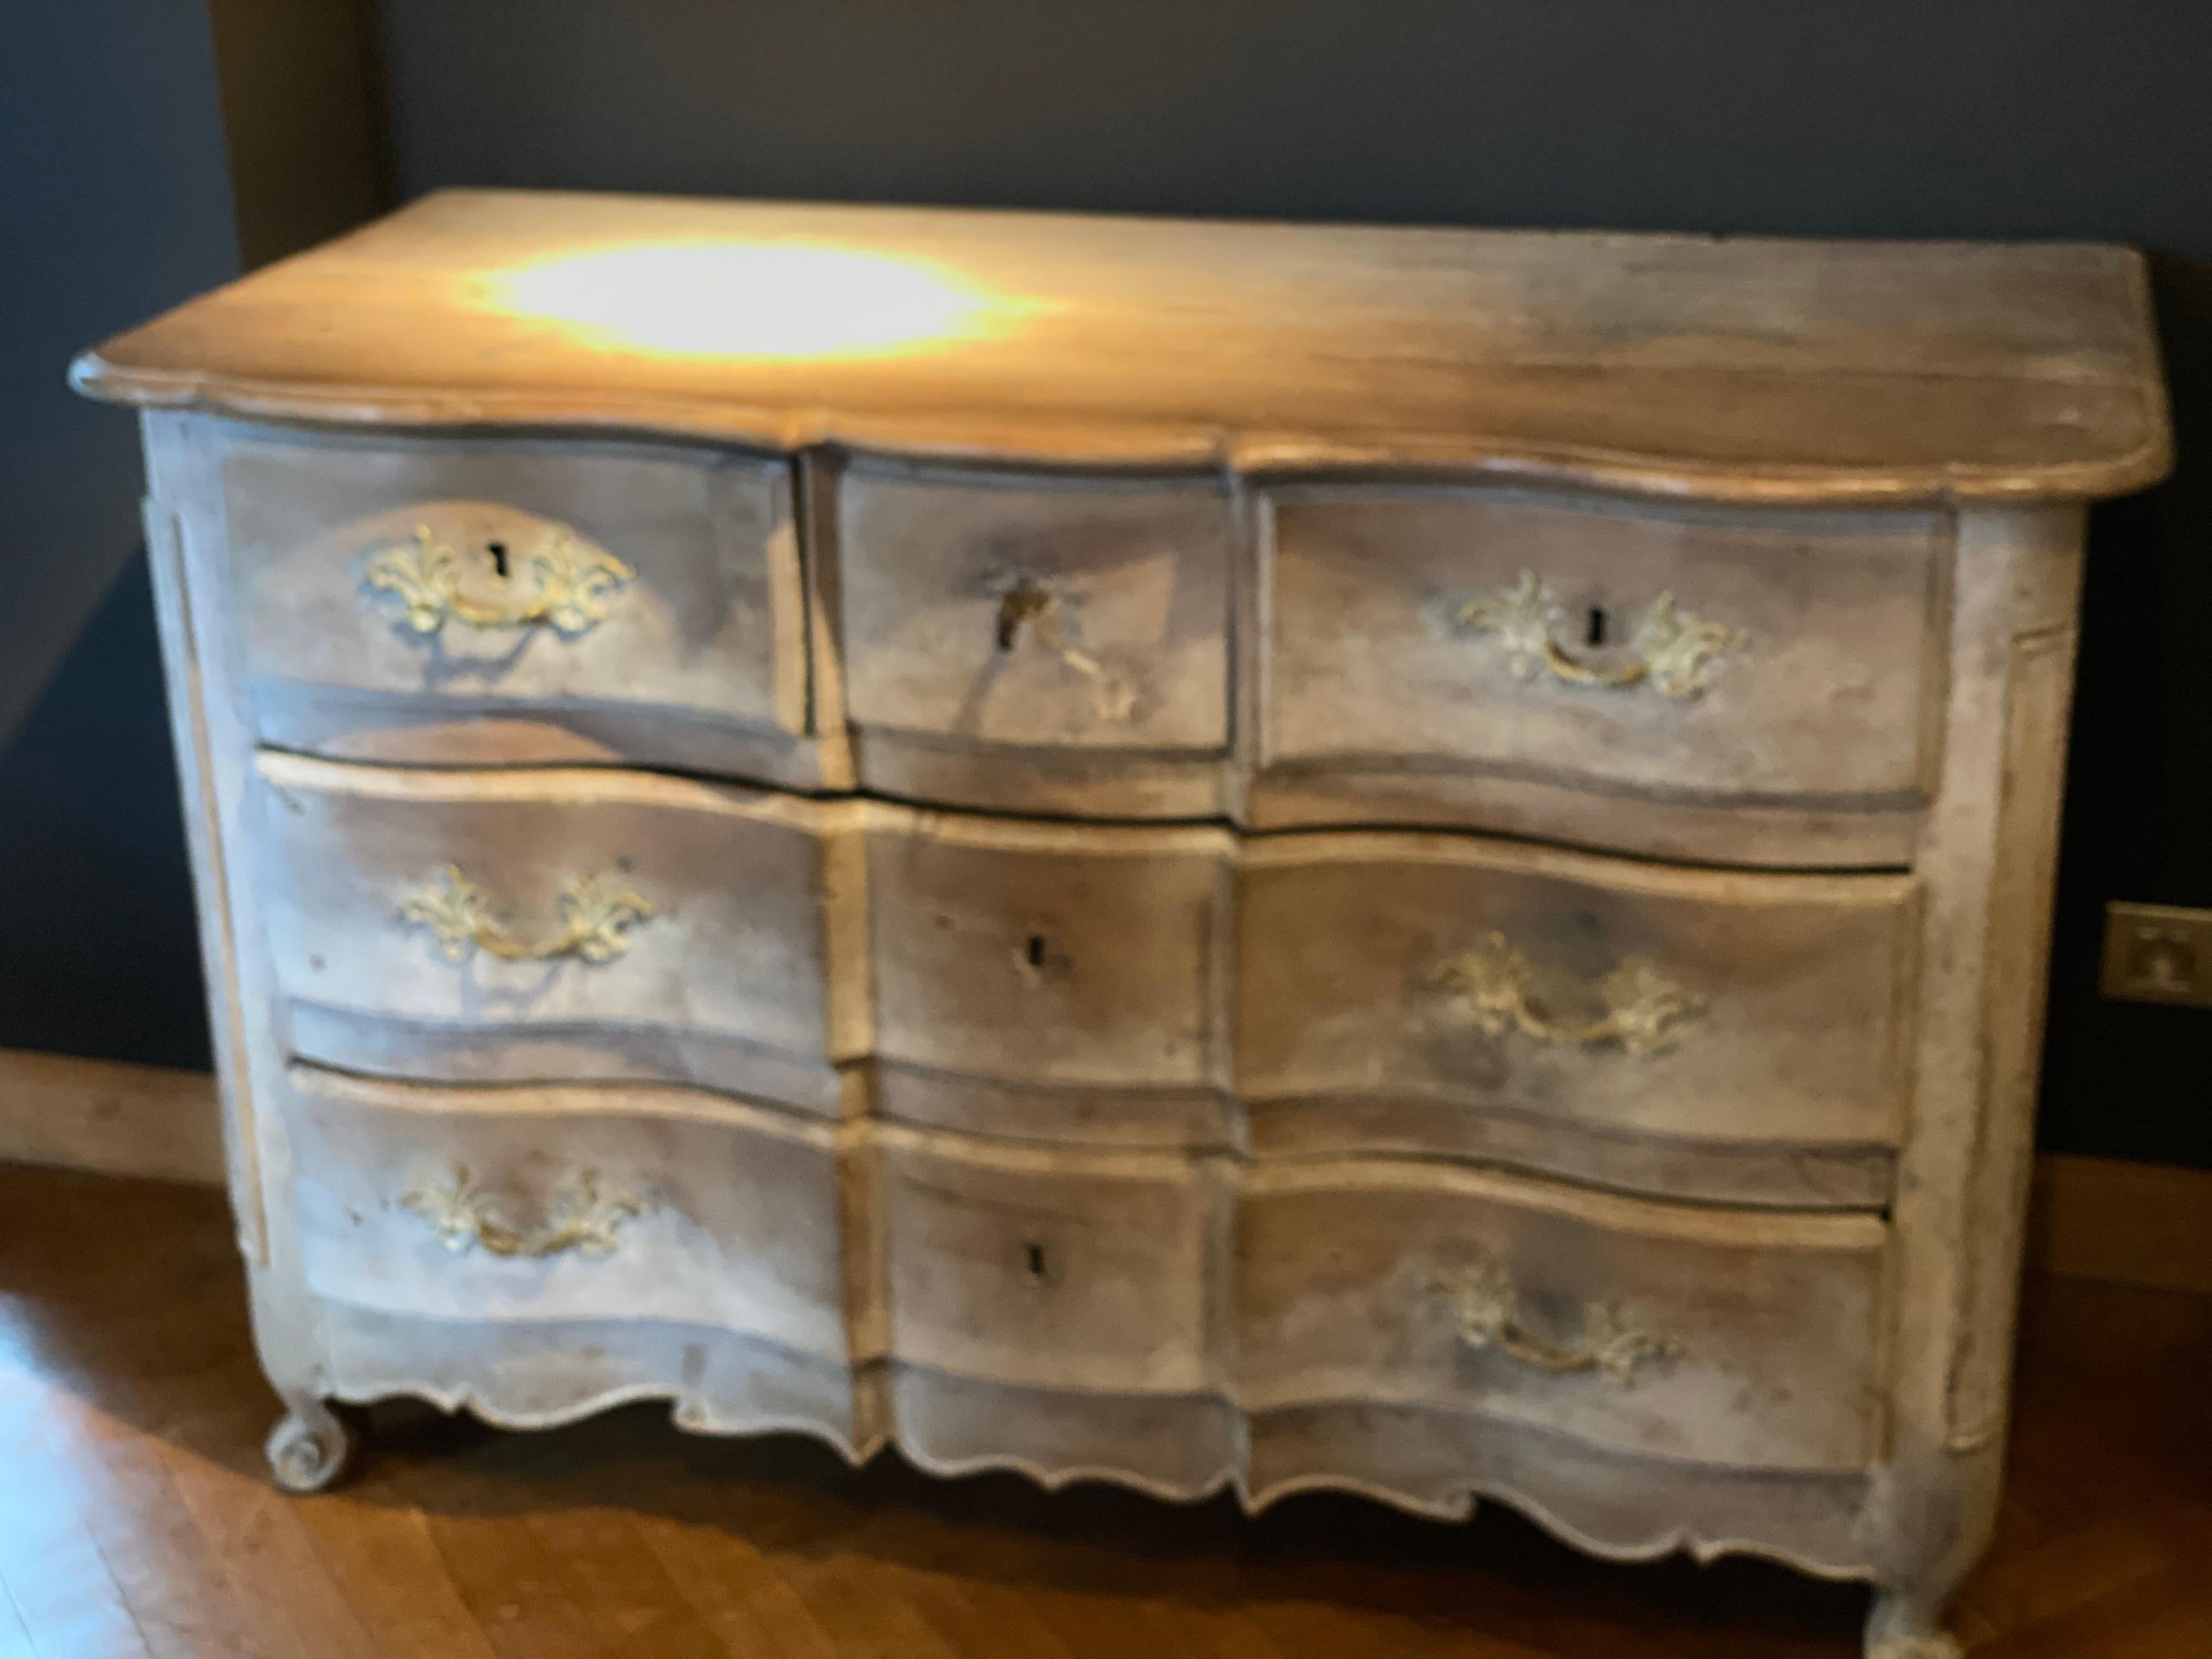 Exceptional Rustic French Commode in a bleached Walnut,
France 18th Century,
the chest has its original Bronze handles,
superb old patina and warm wear of the Walnut,
2 drawers and 3 small drawers give the chest a special effect,
highly